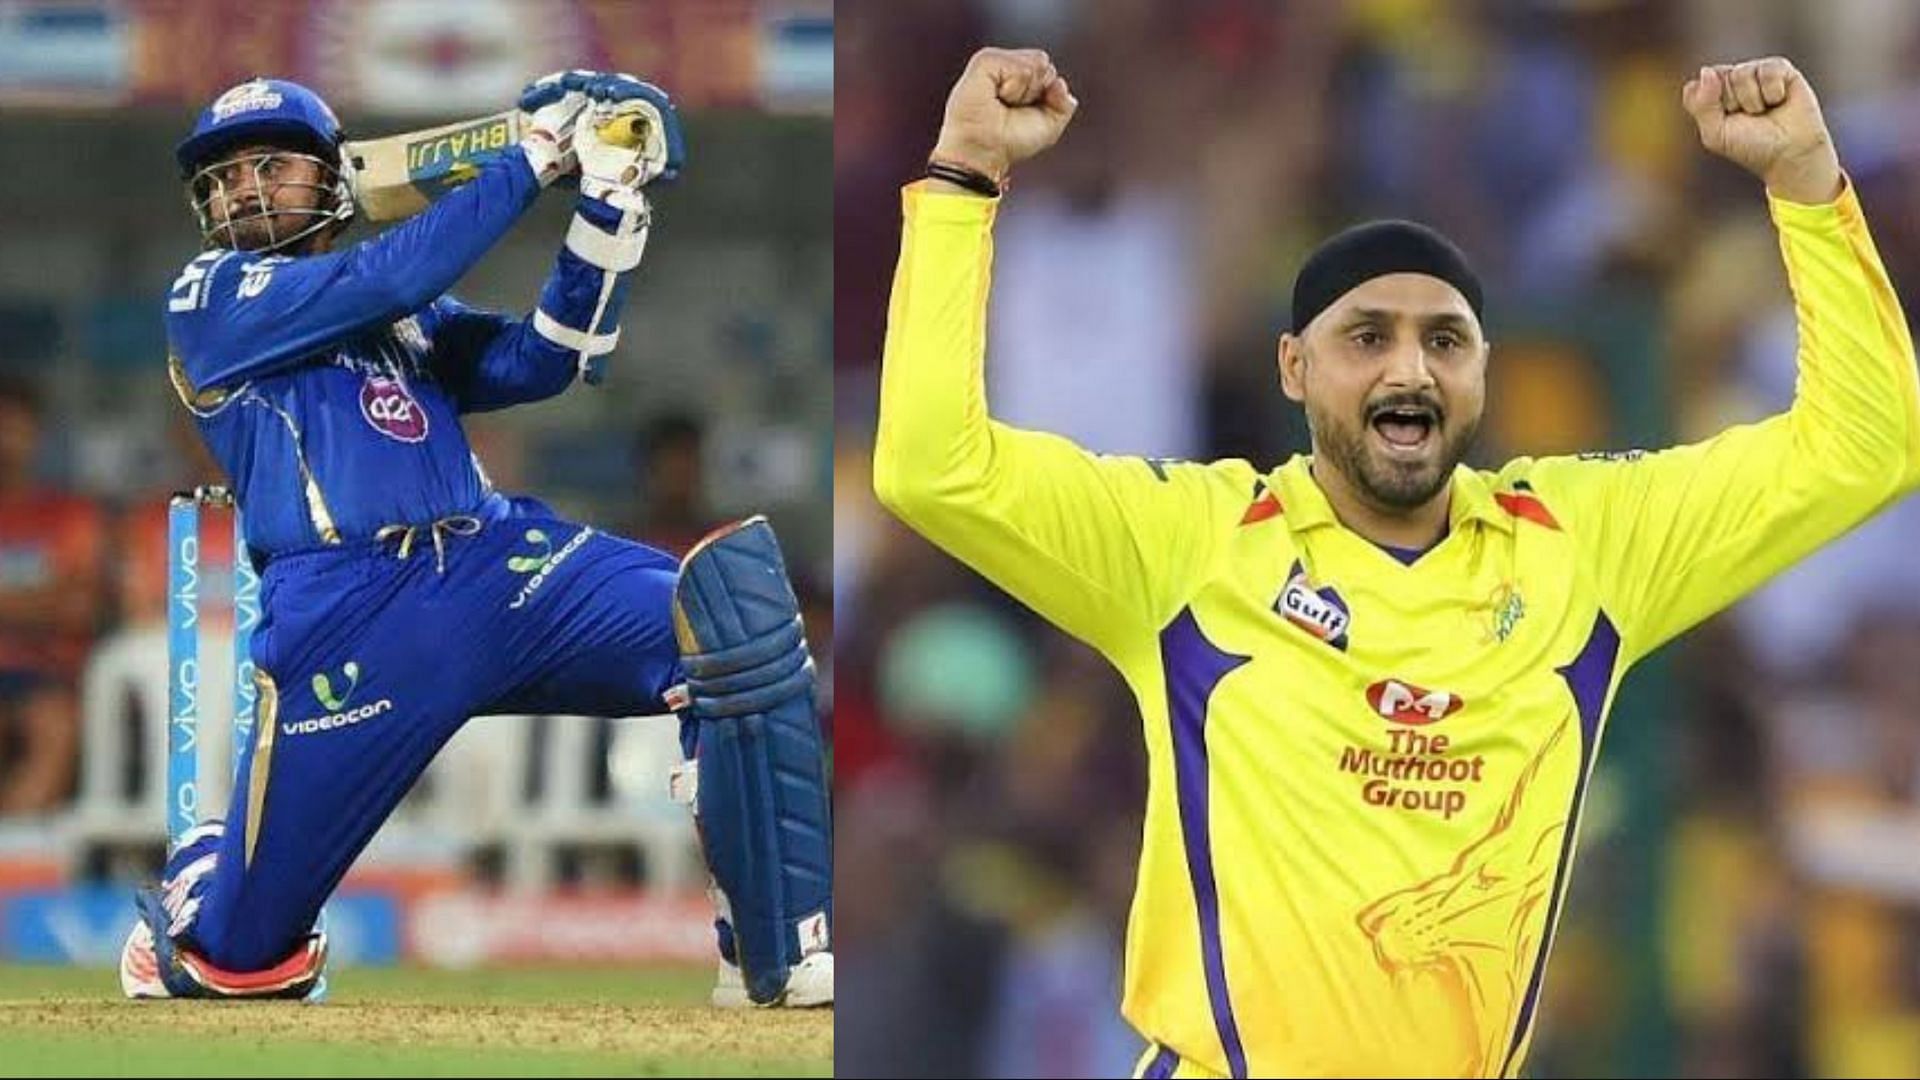 Harbhajan Singh holds some interesting records to his name in the Indian Premier League